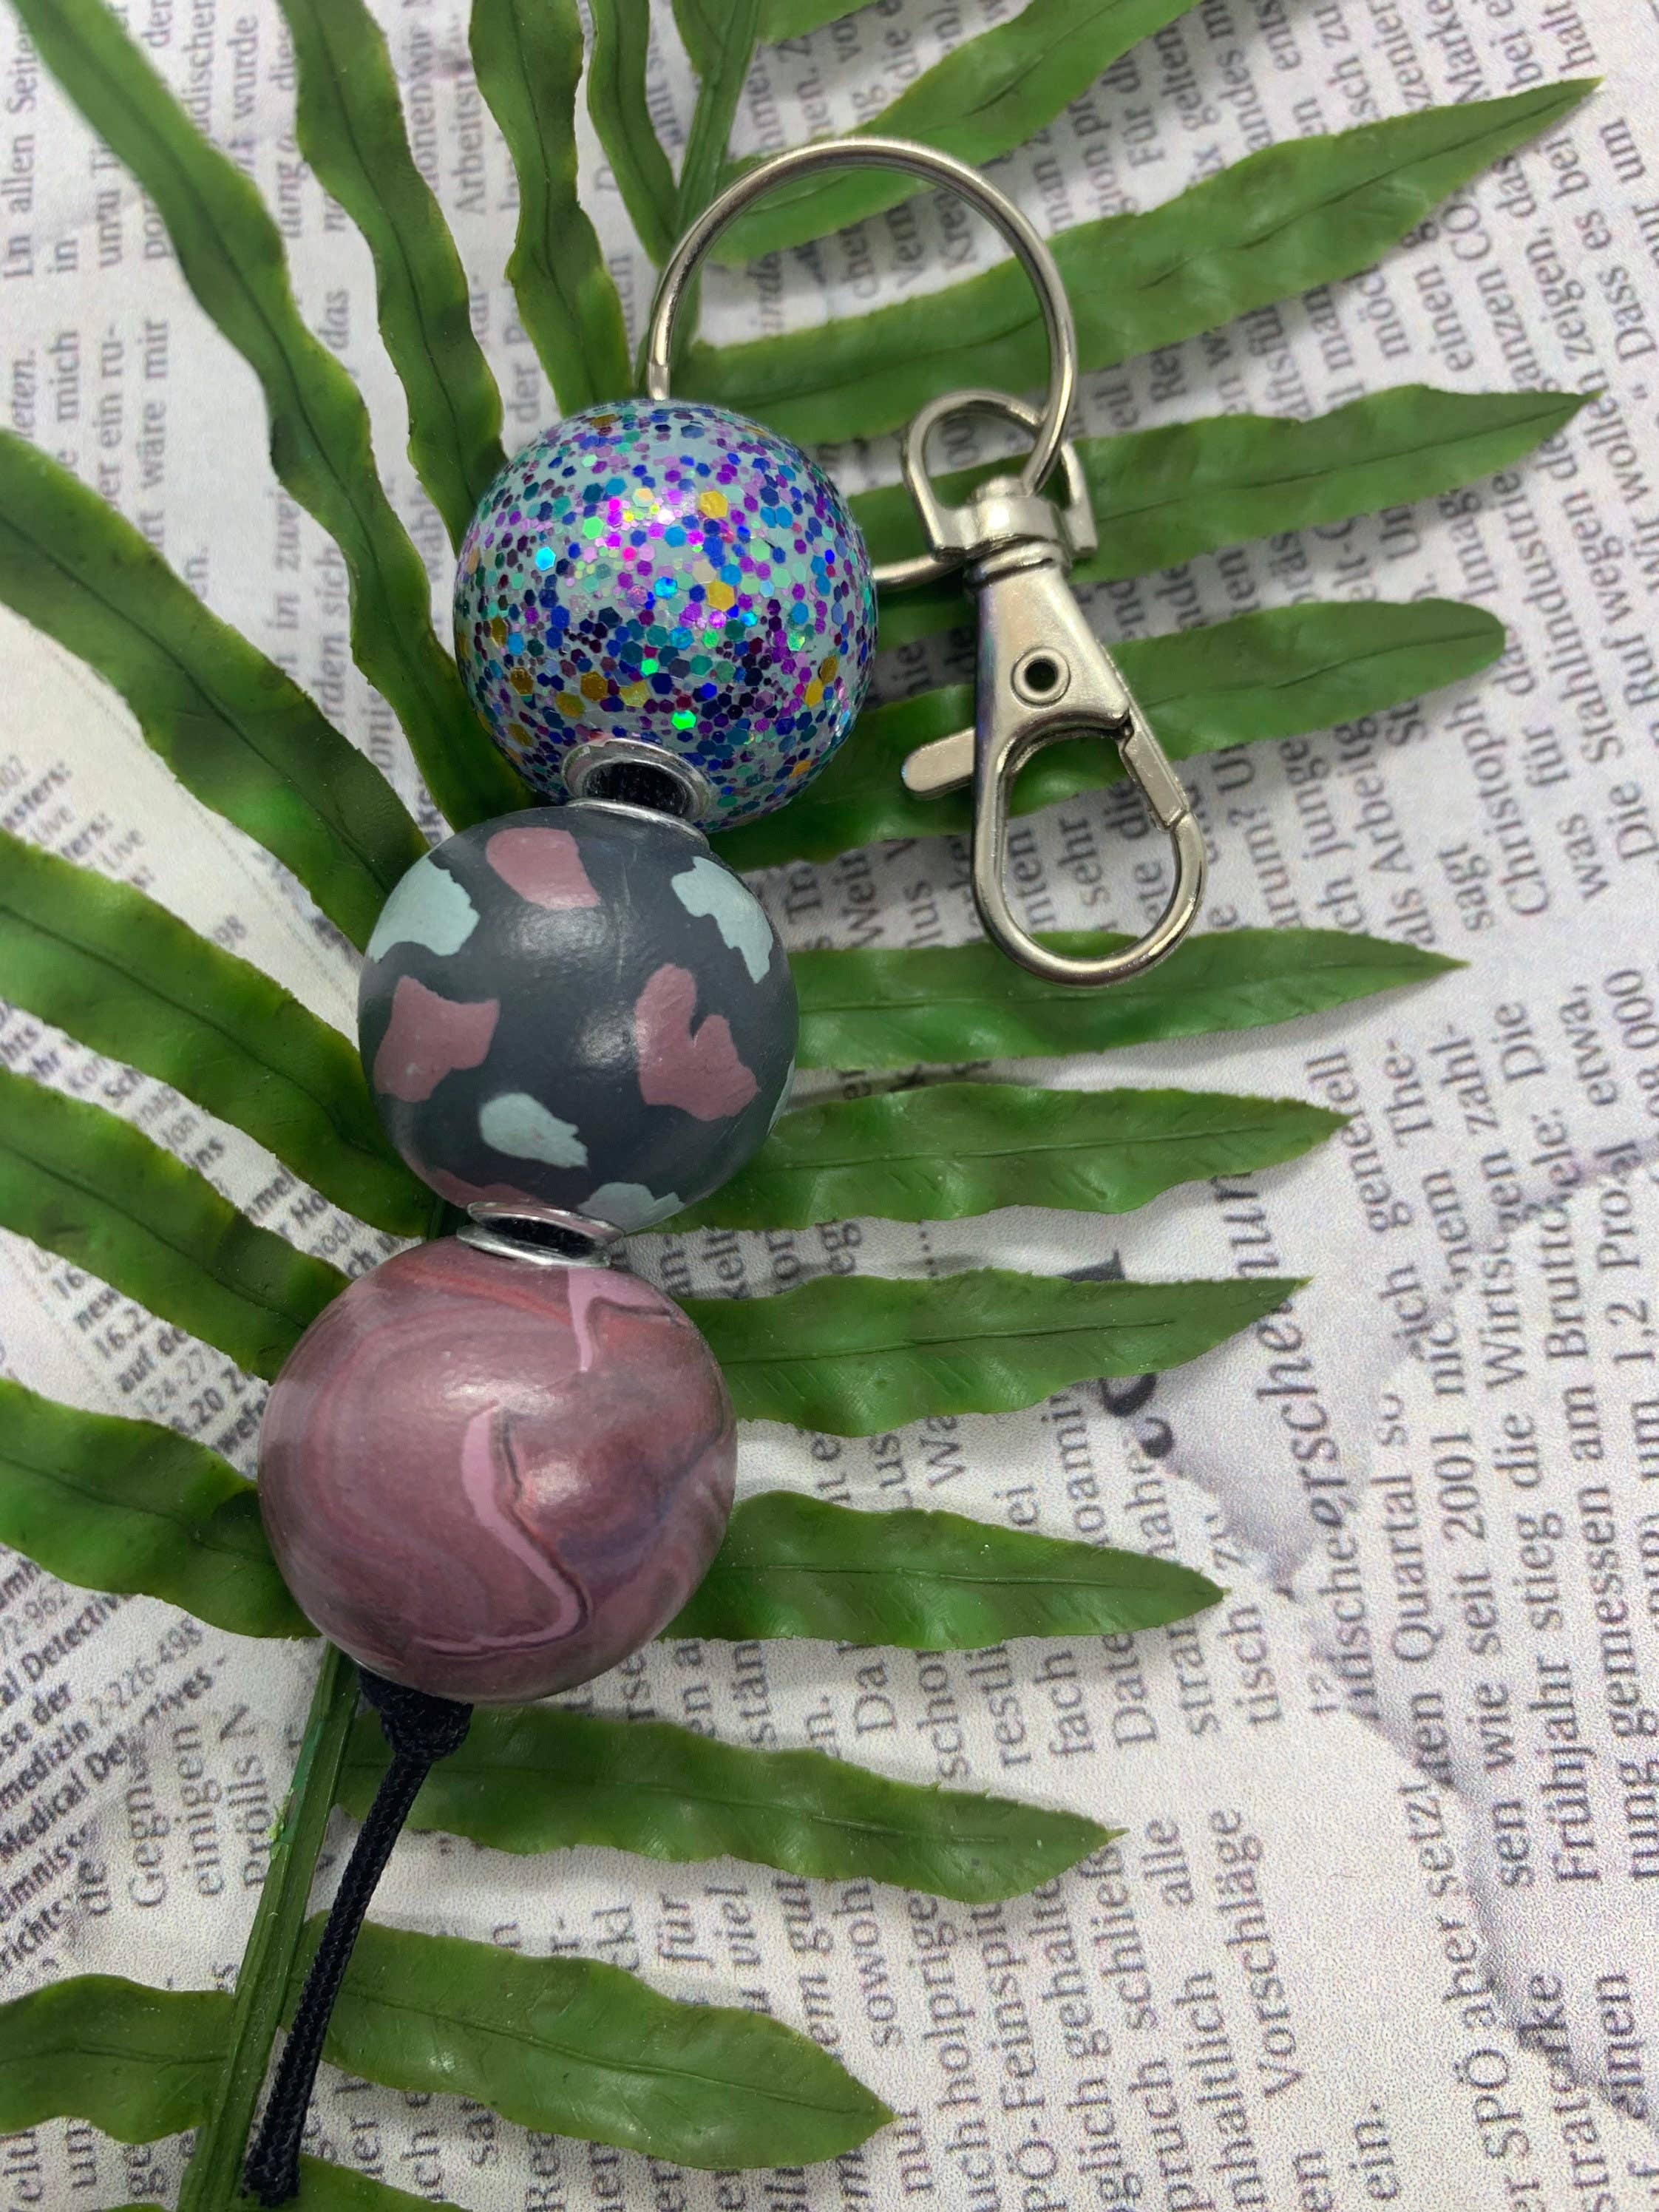 34. Georgia P Designs ~ Flower design Unique handmade polymer clay key ring  or bag charms £5.00 each | The Crafty Network